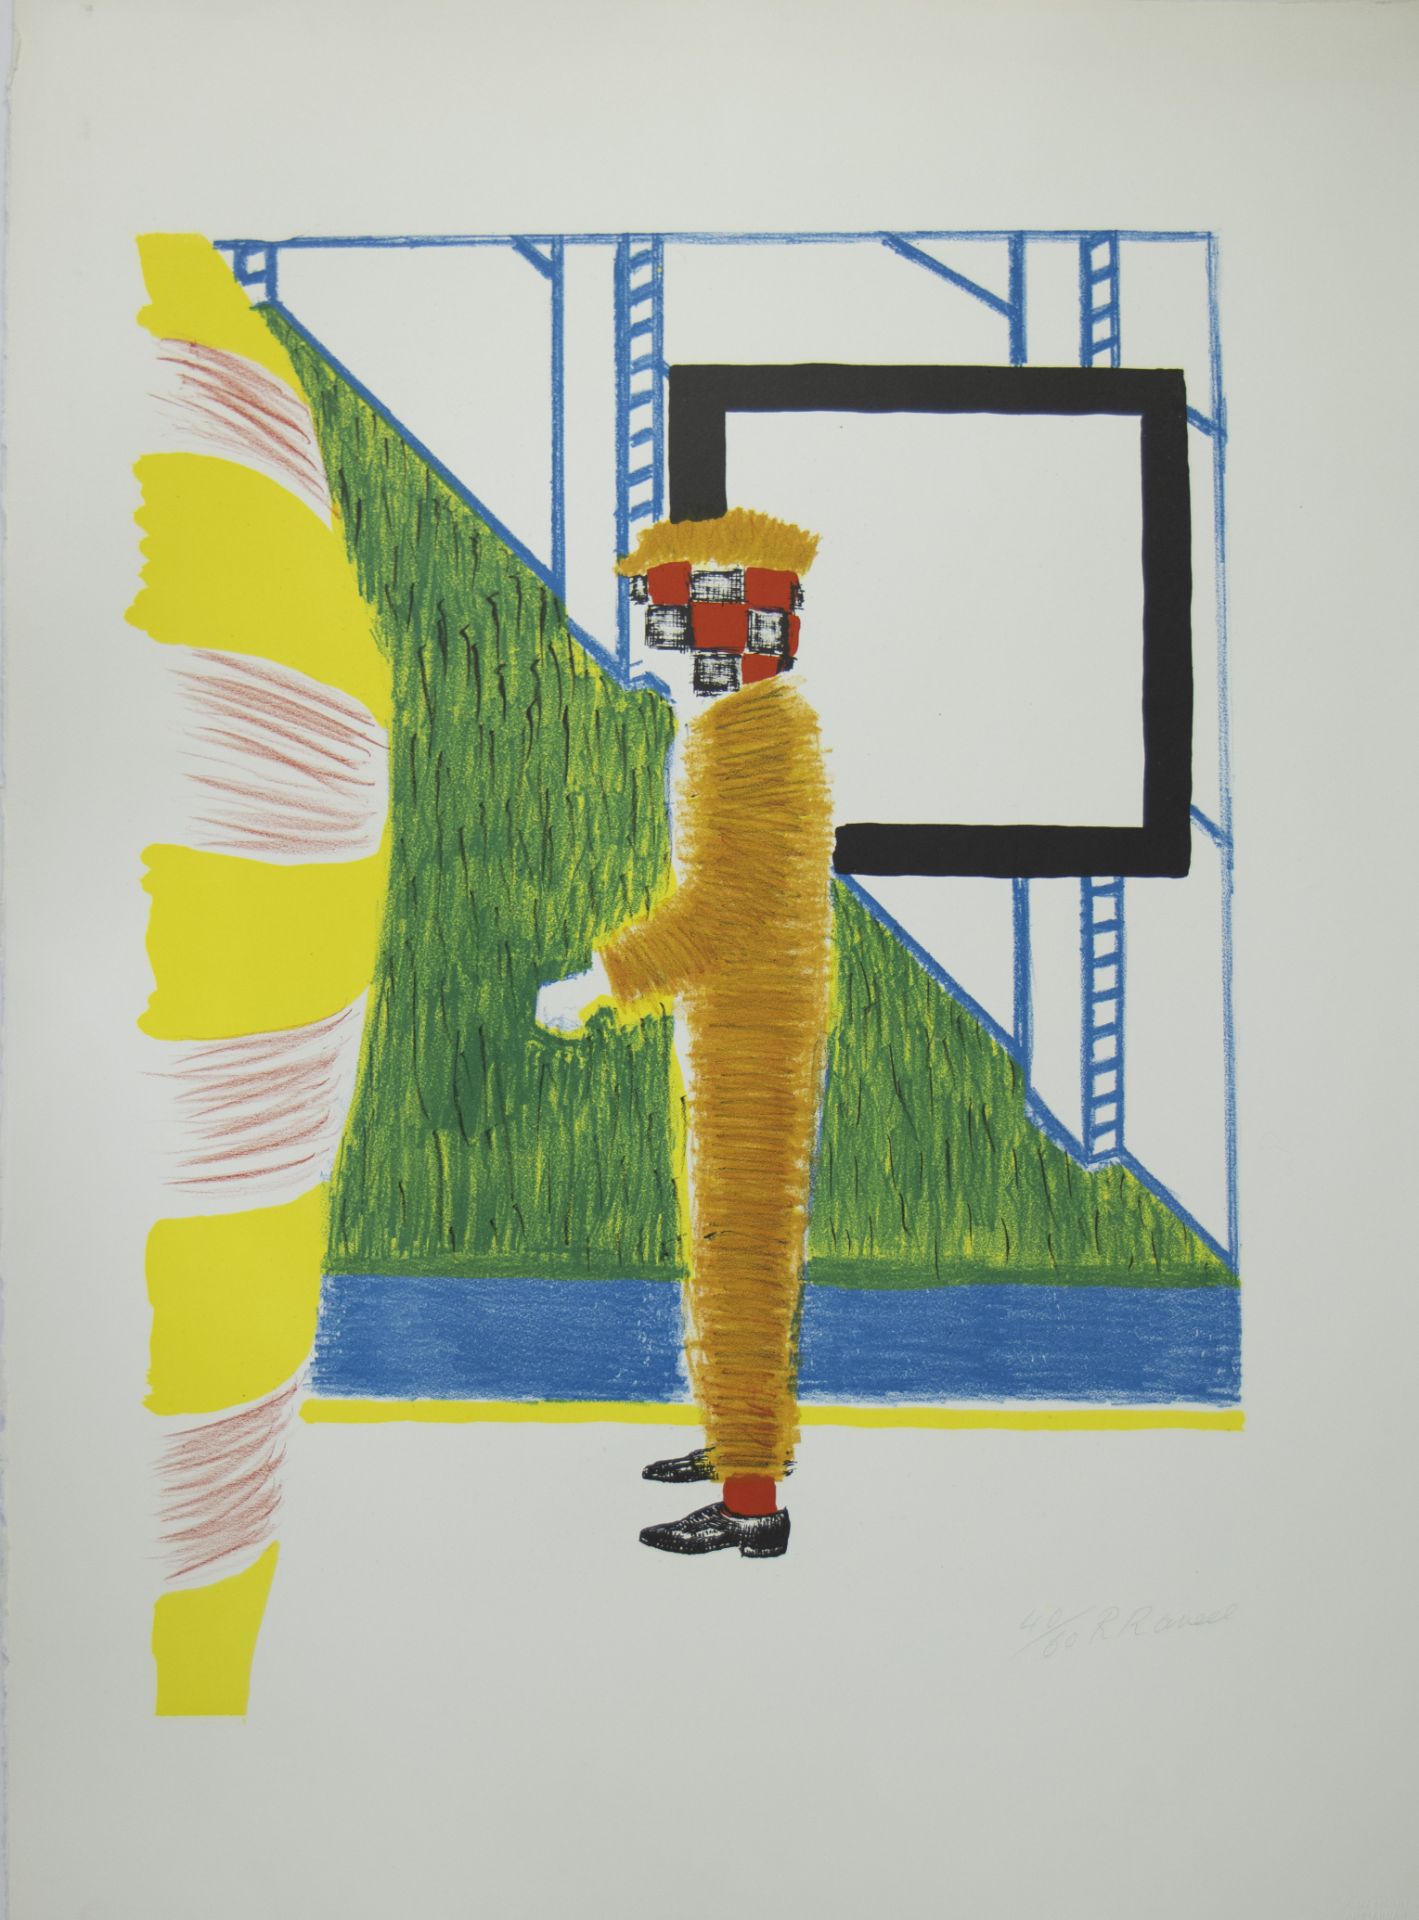 Roger RAVEEL (1921-2013), colour lithograph 'Gesprek in de tuin', numbered 40/60 and signed